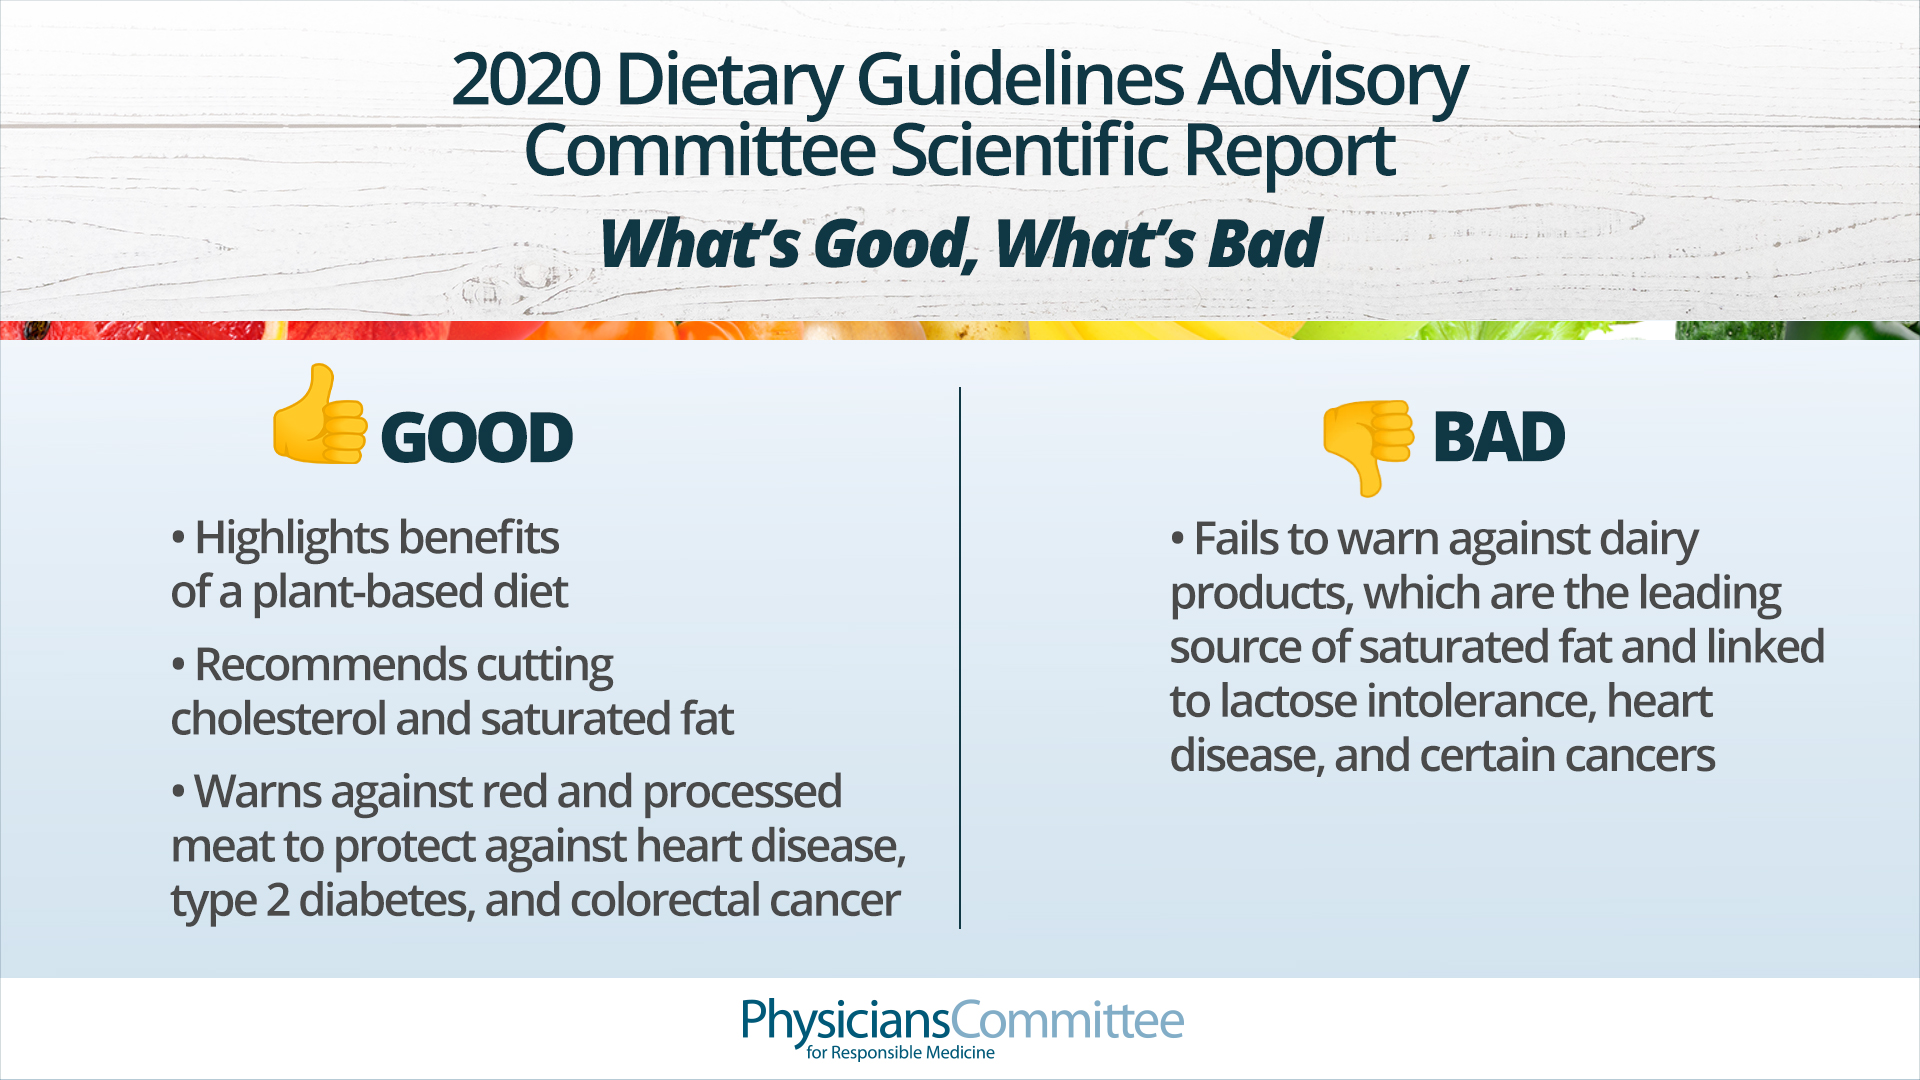 Dietary Guidelines Report Right on Eating Plant-Based Diet, Saturated Fat, Meat, Cholesterol